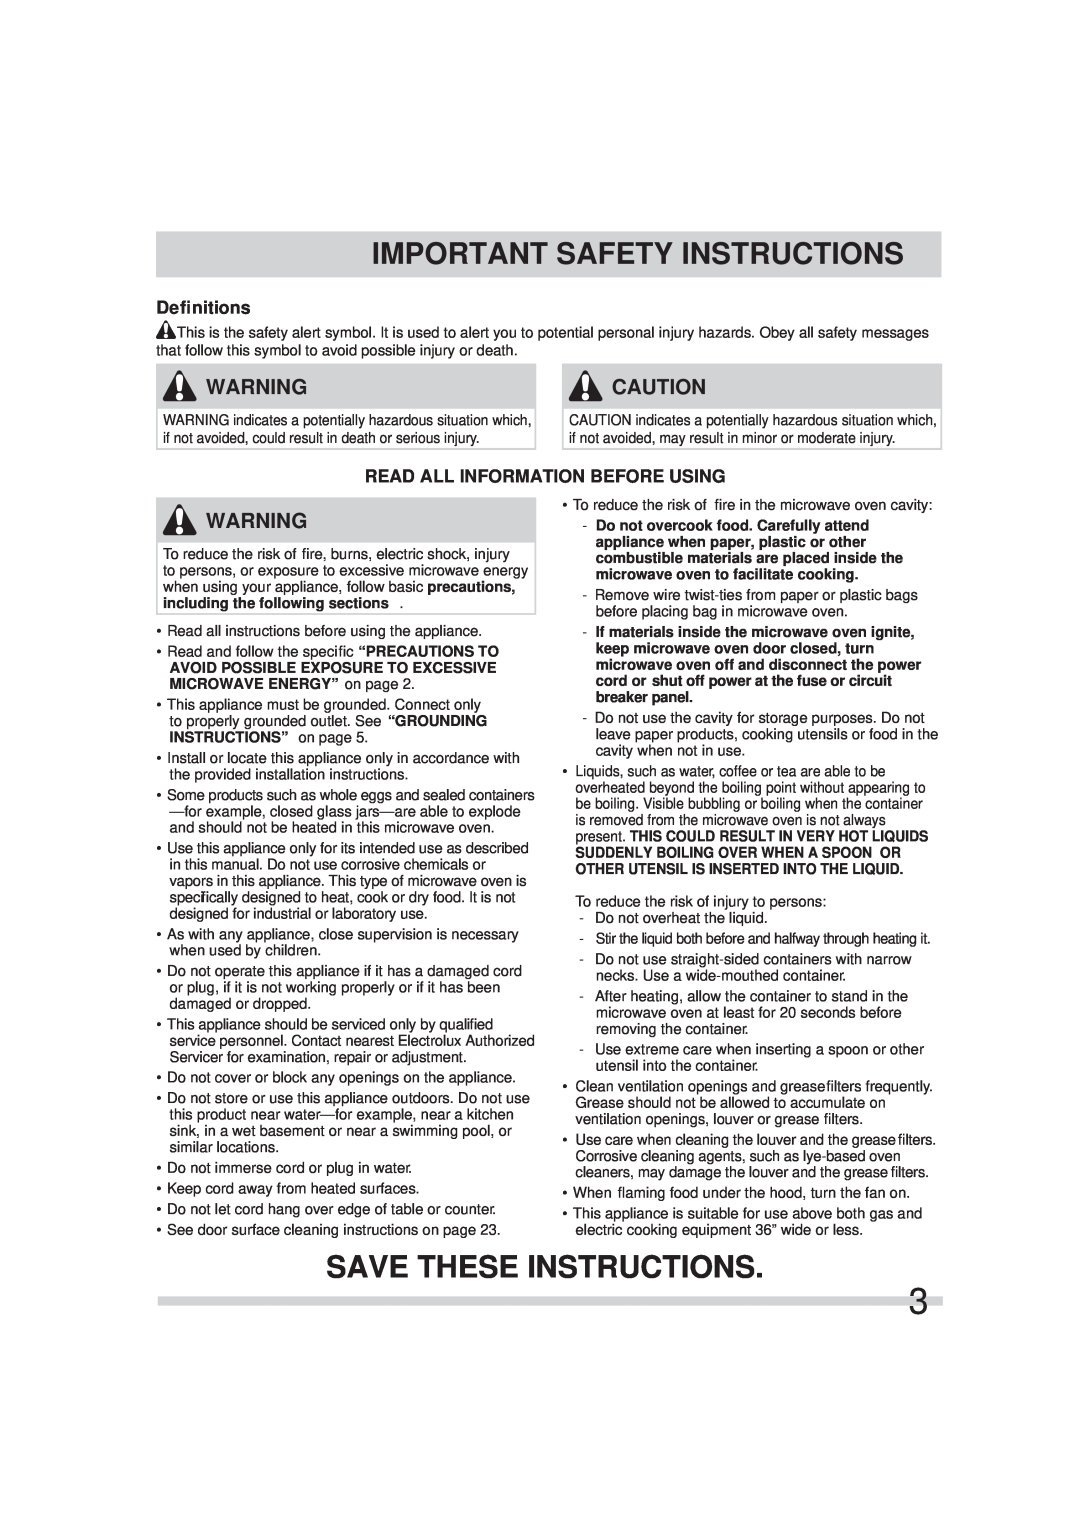 Frigidaire FFMV154CLS, FFMV152CLB, FFMV152CLW Save These Instructions, Deﬁnitions, Read All Information Before Using 